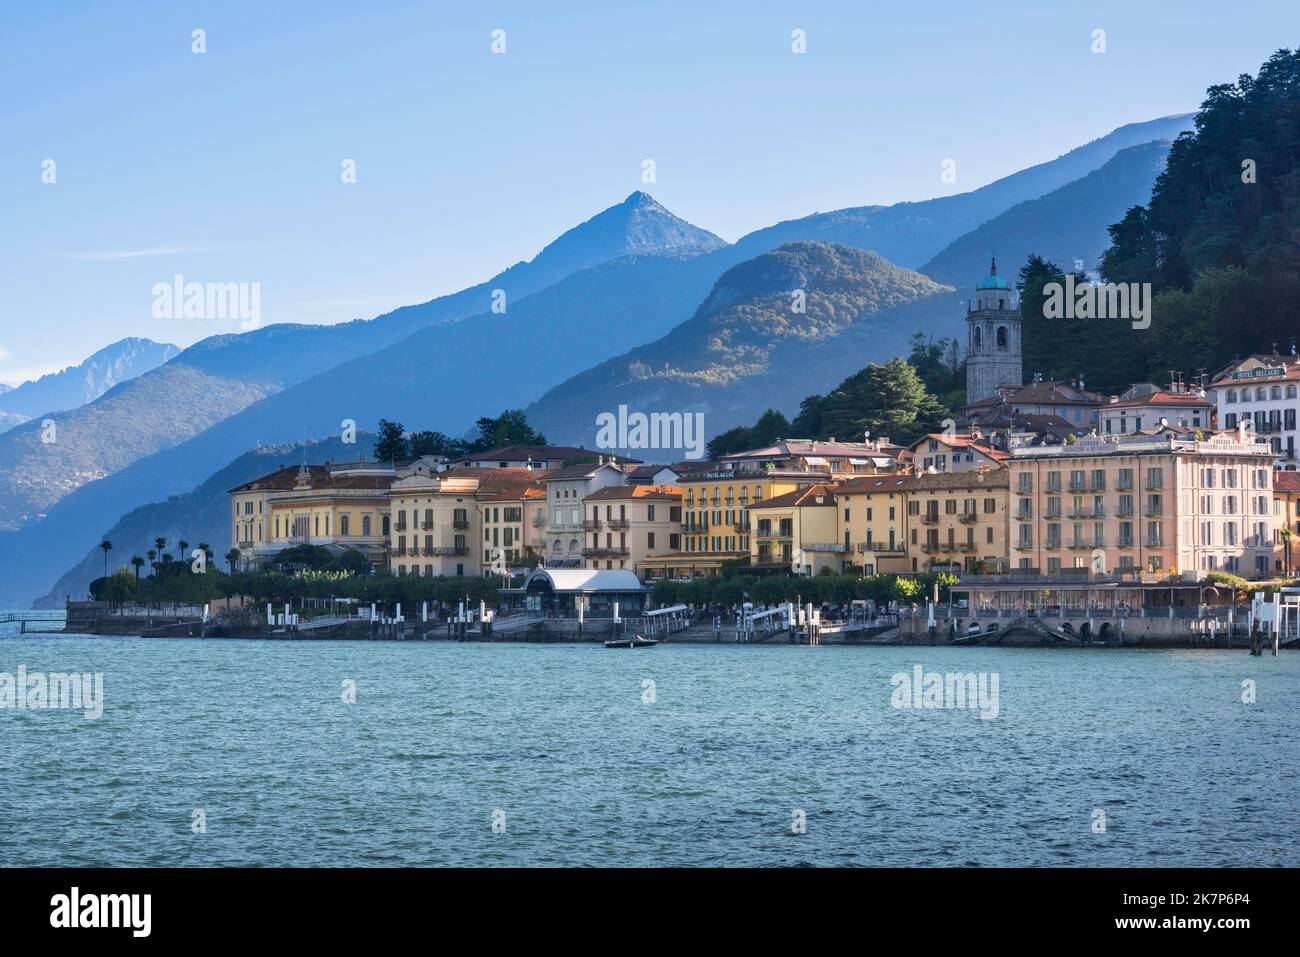 Bellagio Italy, scenic view of the attractive lakeside town of Bellagio in Lake Como, Italian Lakes, Lombardy, Italy Stock Photo